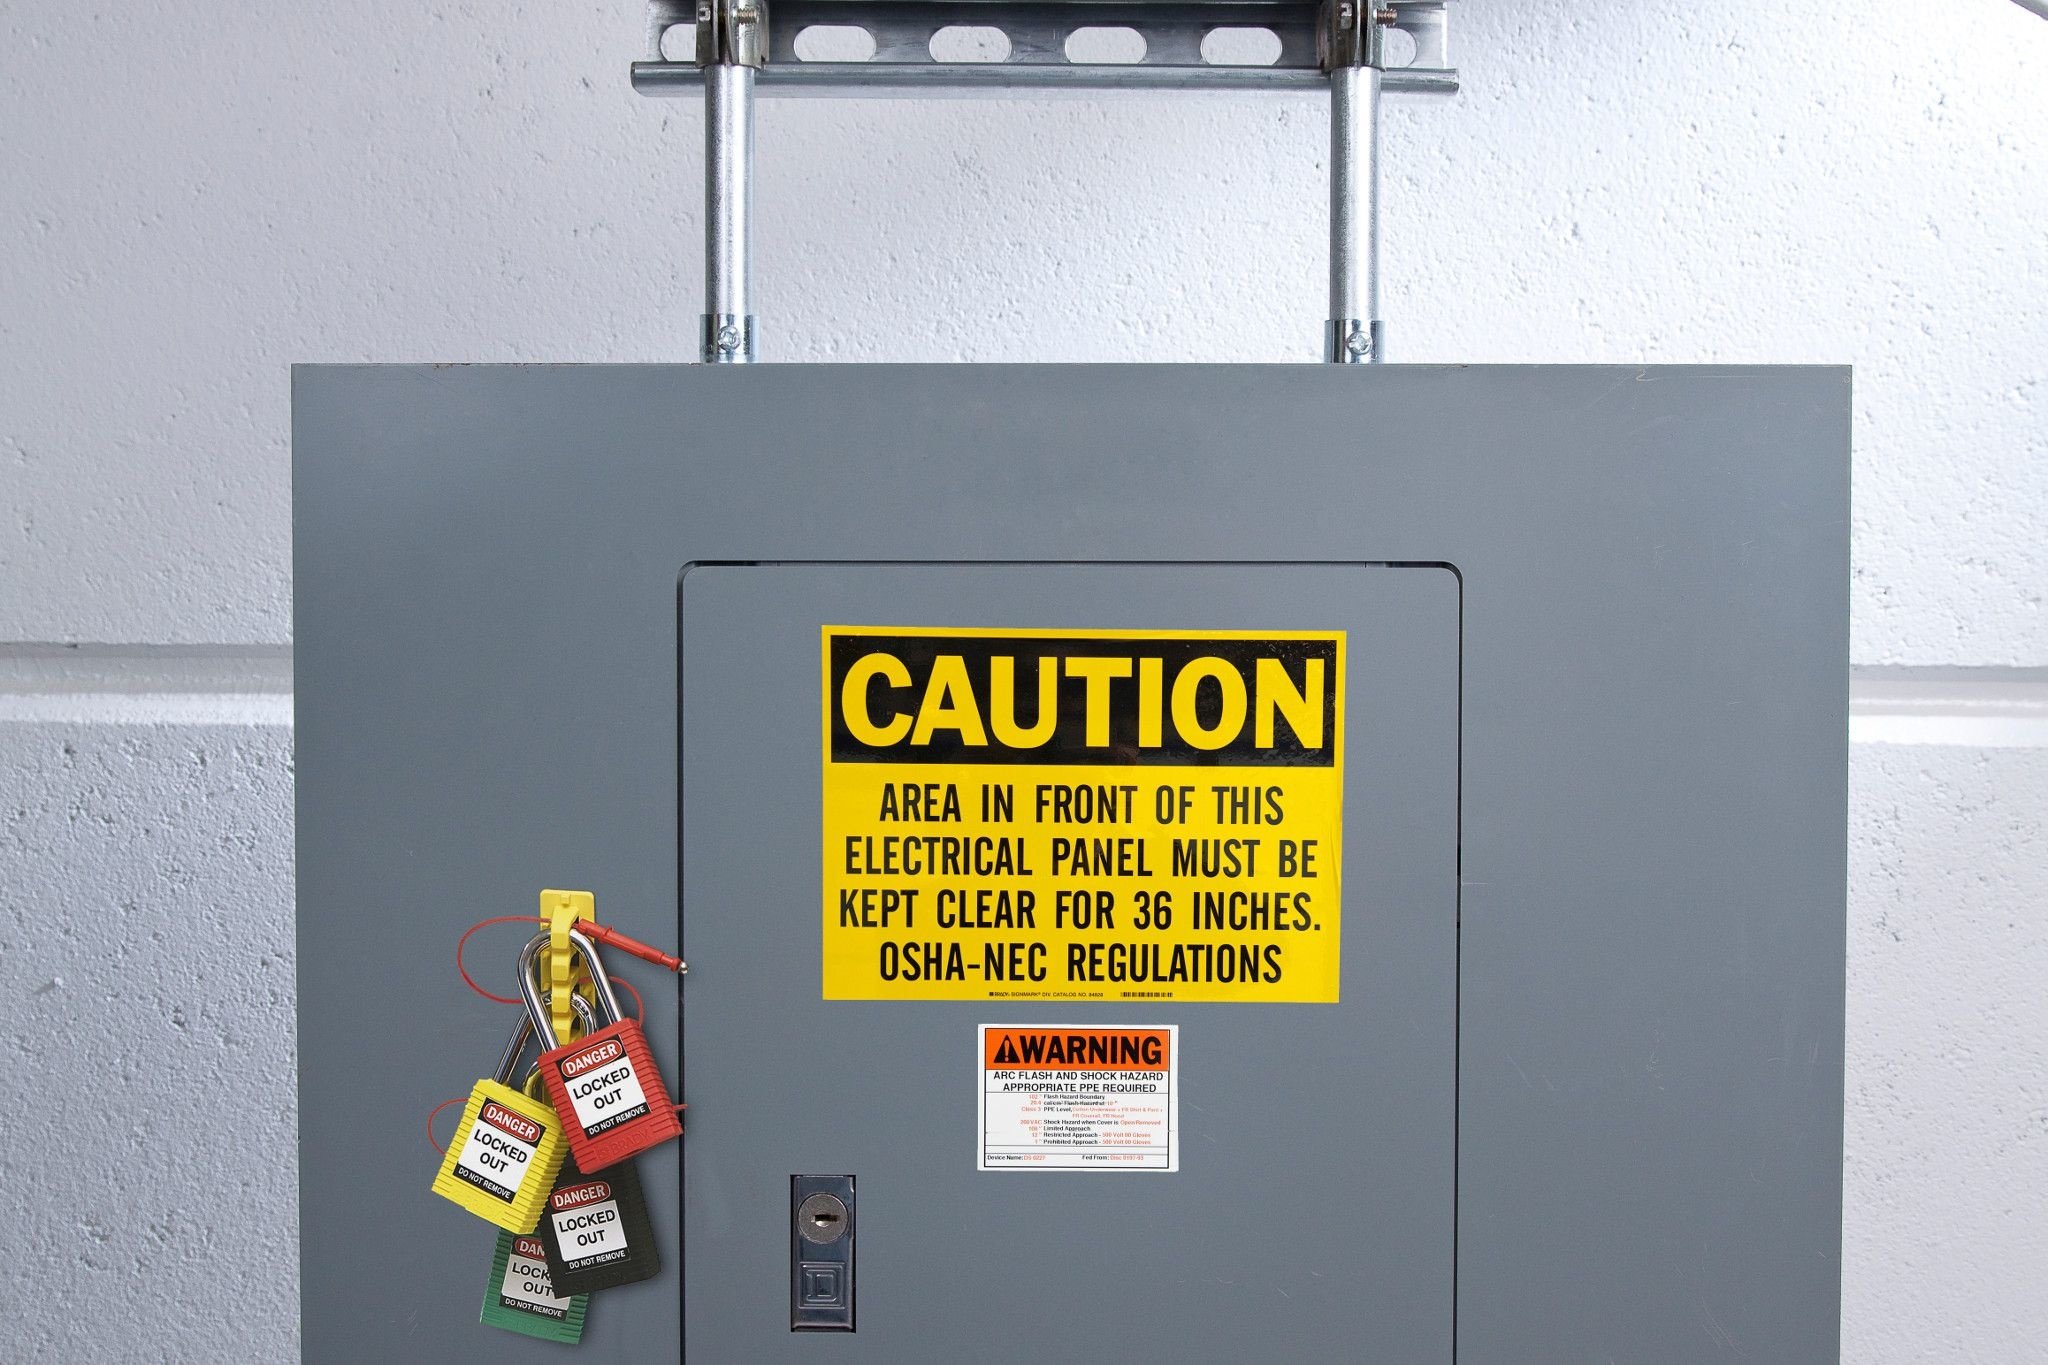 Lockout Tagout for Electrical Safety: Tips and Best Practices!